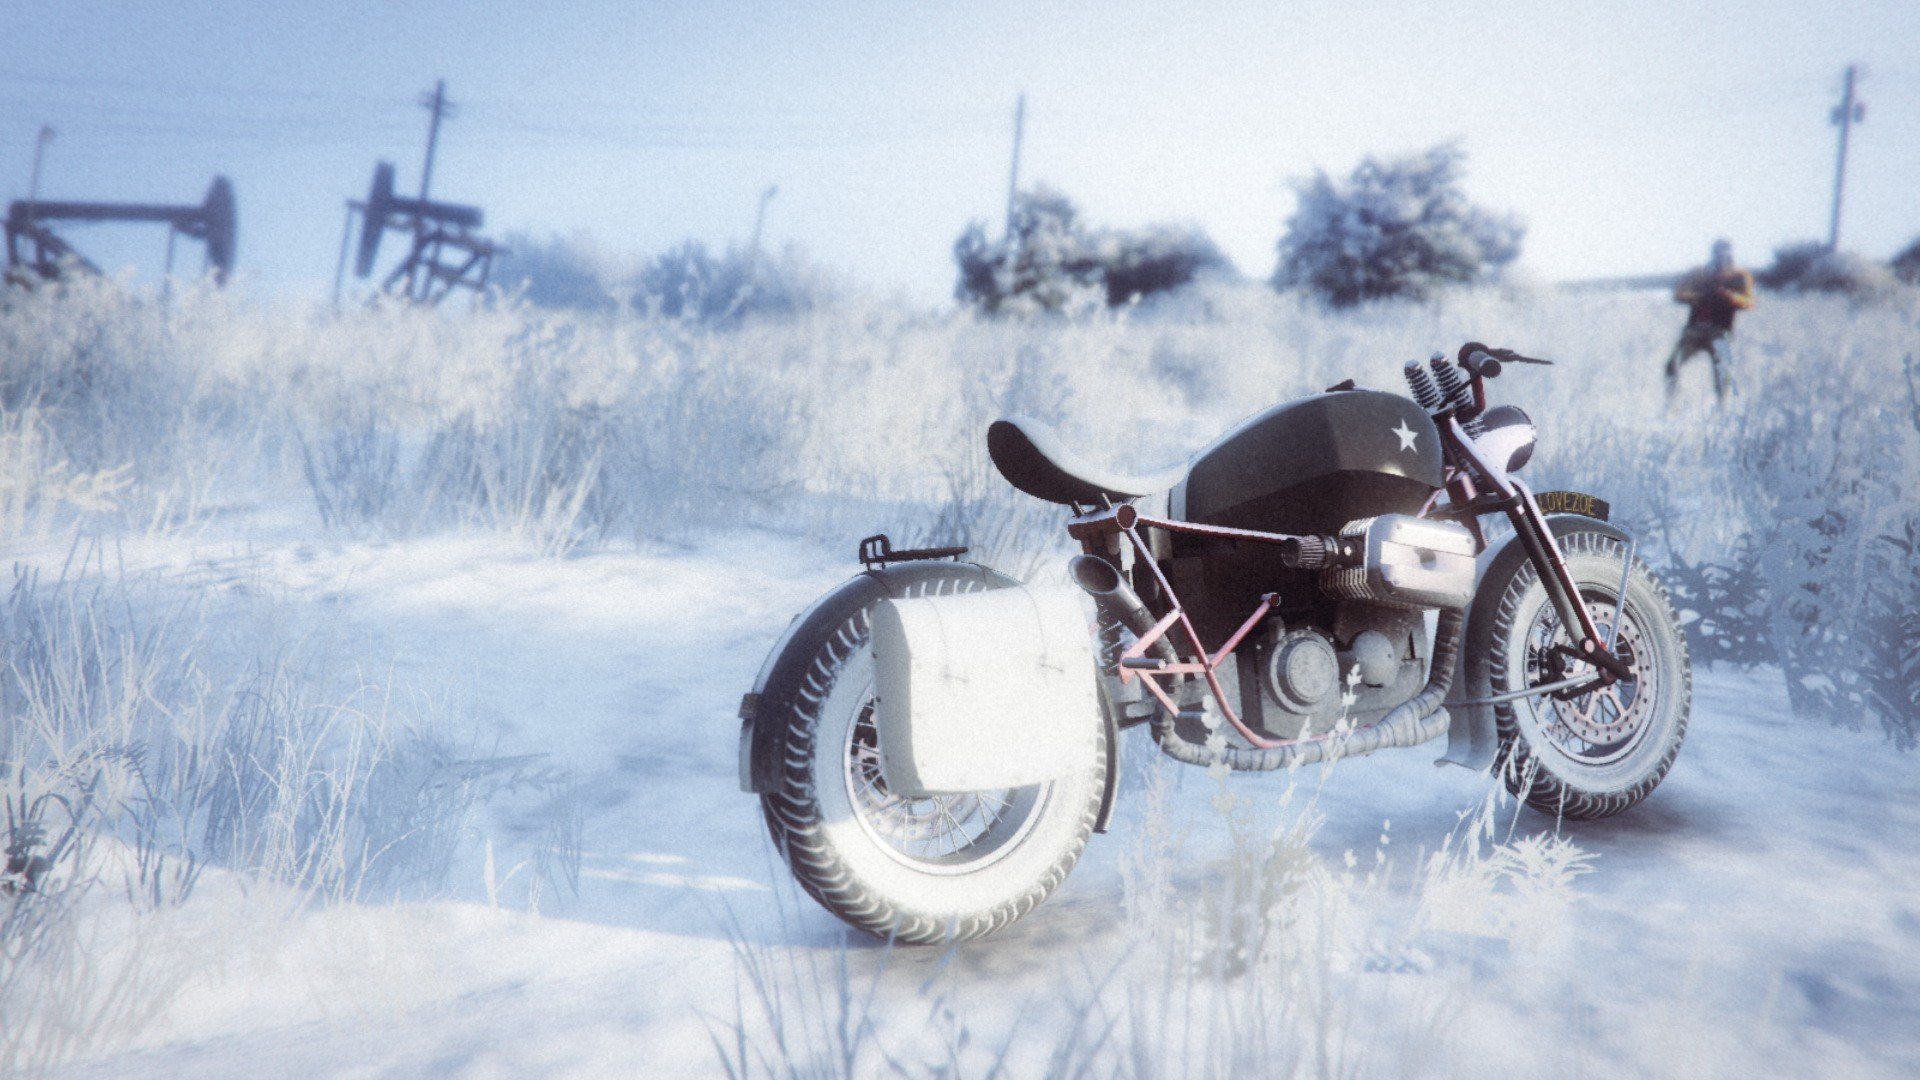 Rockstar Games, Grand Theft Auto V, Grand Theft Auto Online, Motorcycle, Snow Wallpaper